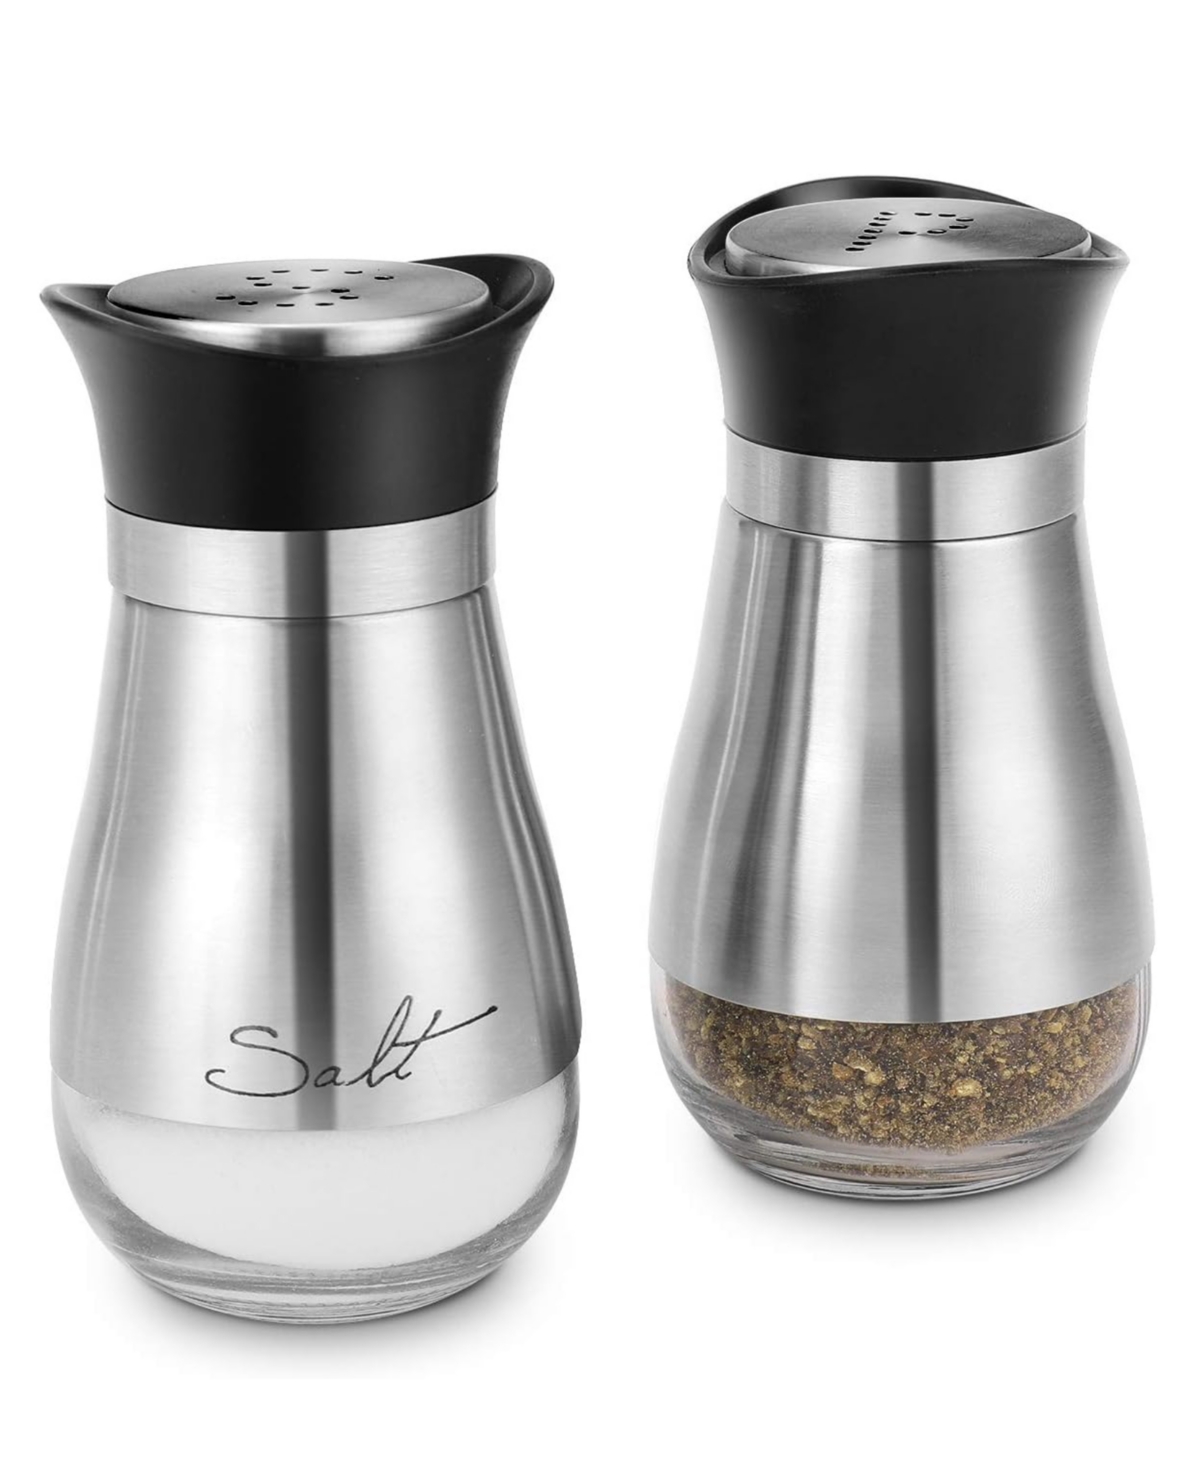 American Atelier Azv Cafe Contempo Silver And Glass 2 Pc Salt And Pepper